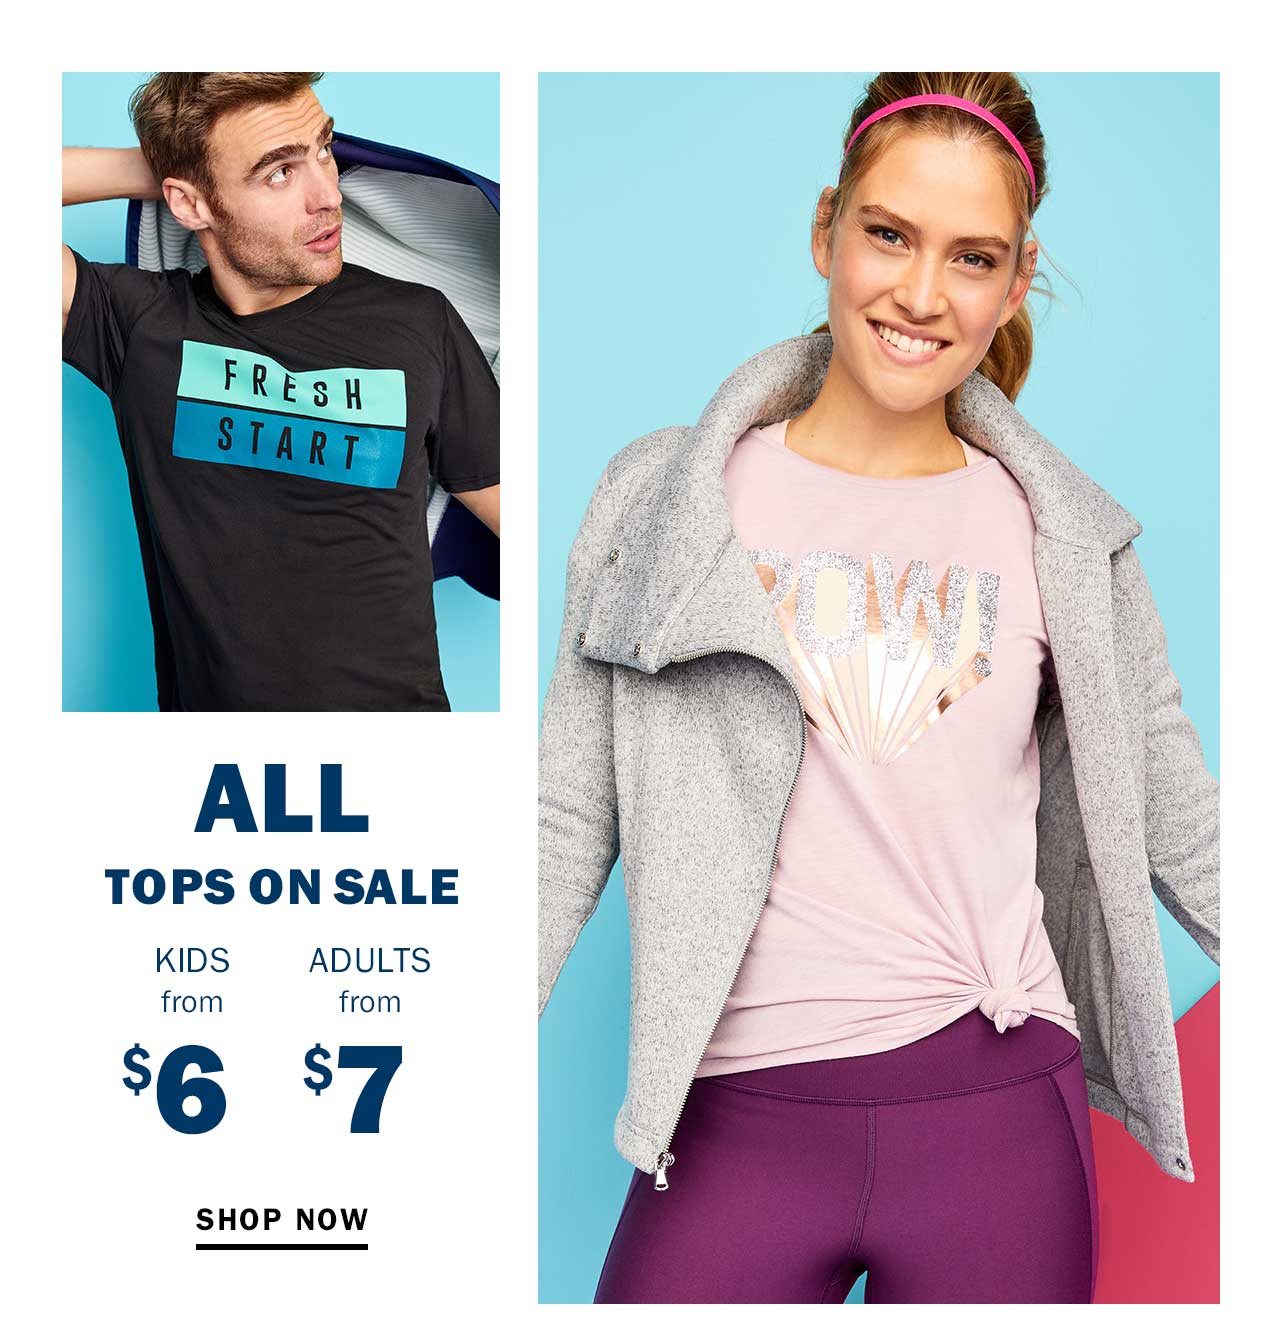 All tops on sale